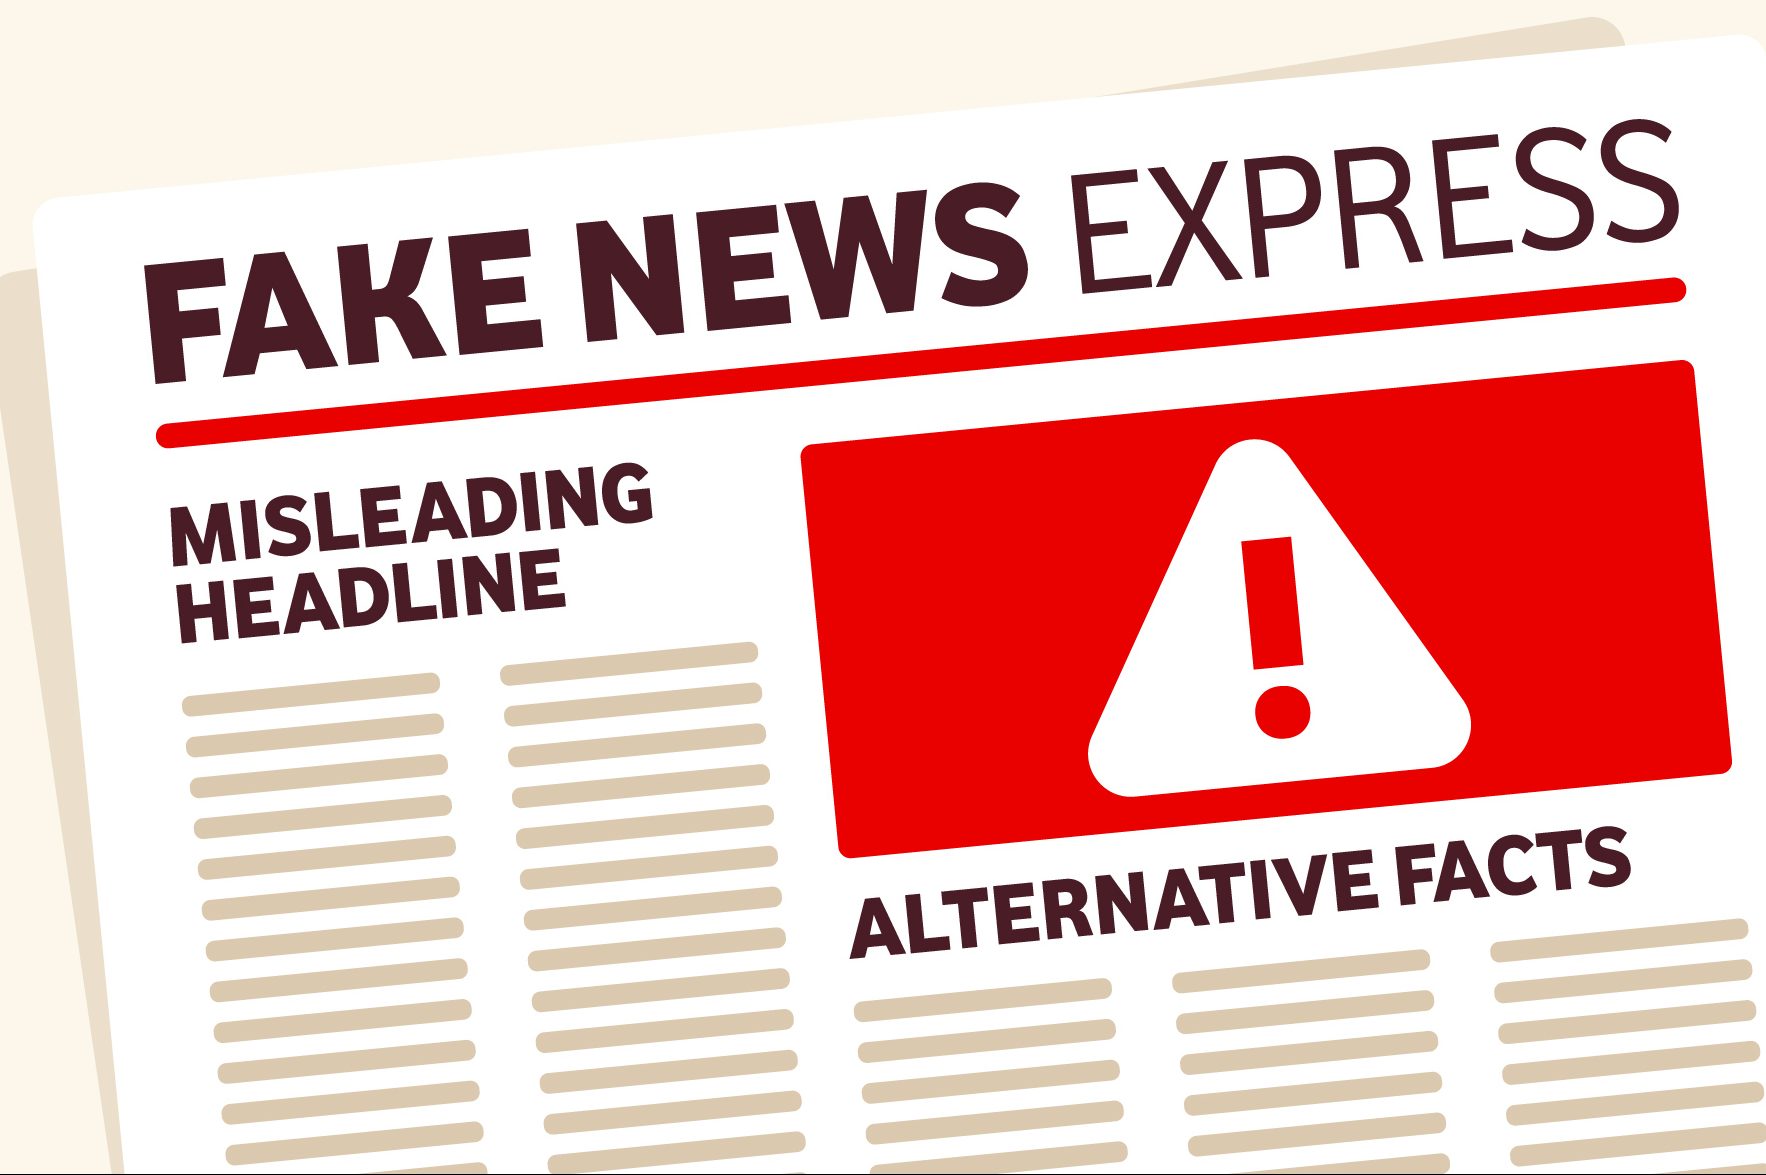 Fake news: 46% of UK teens have fallen for it Vodafone research suggests